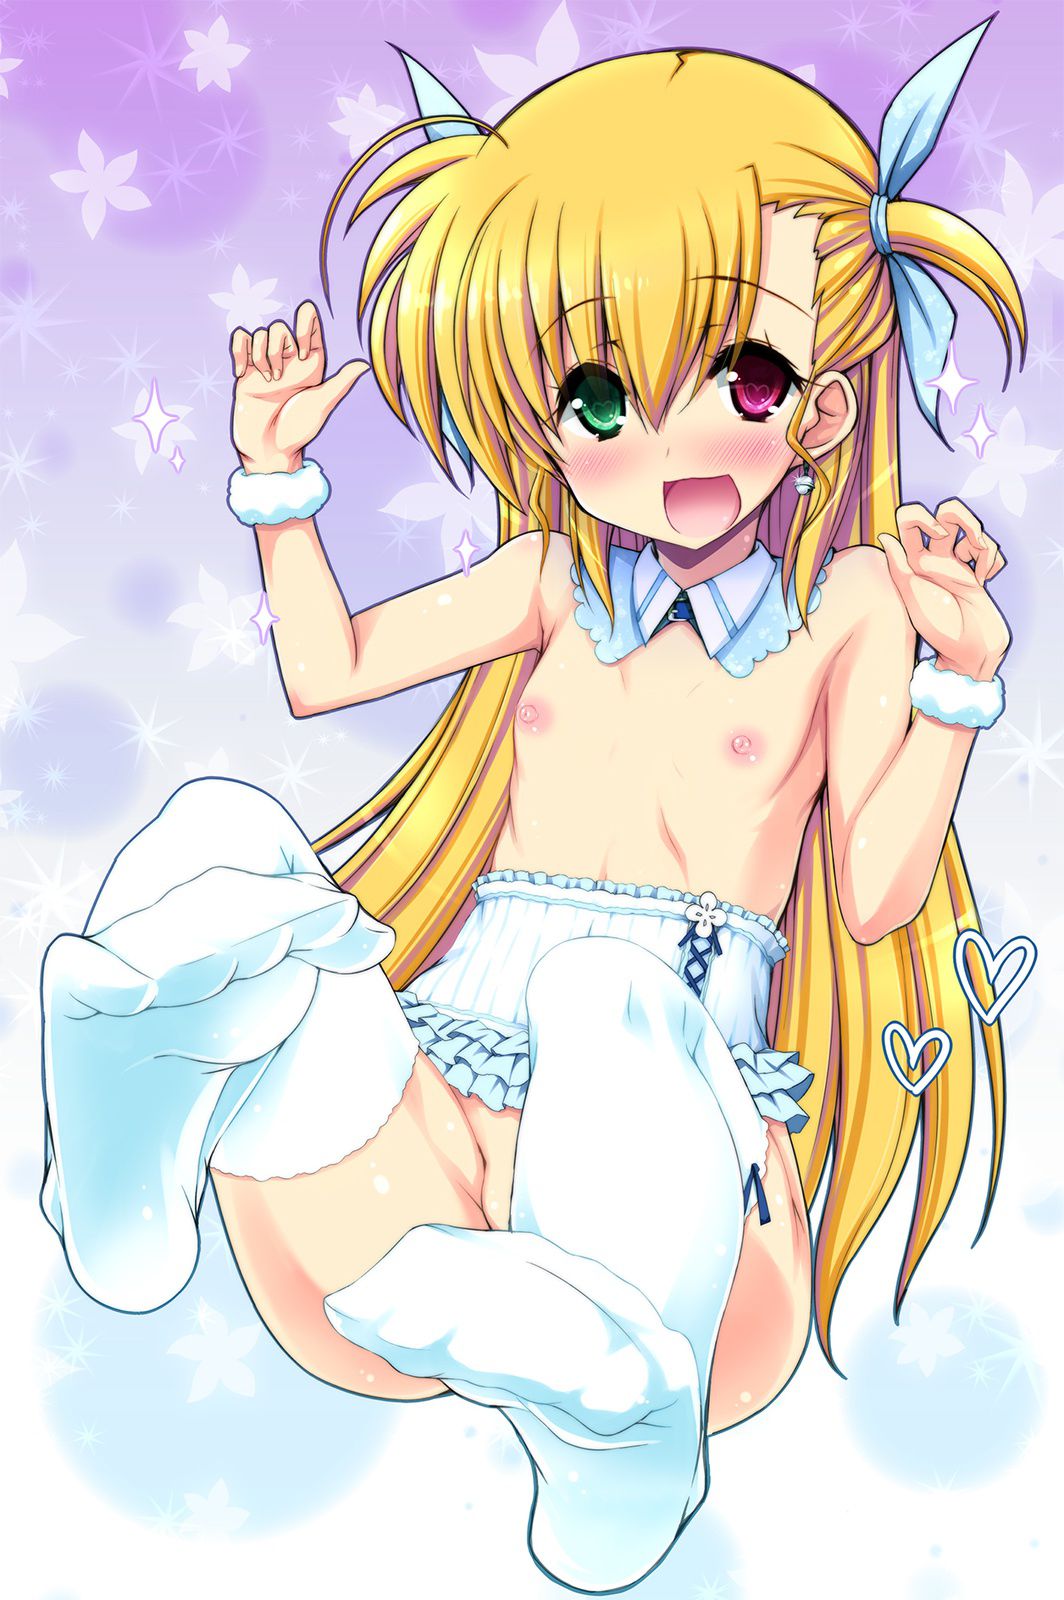 [Magical Girl Lyrical Nanoha] is a thread that will put a random image of erotic 5